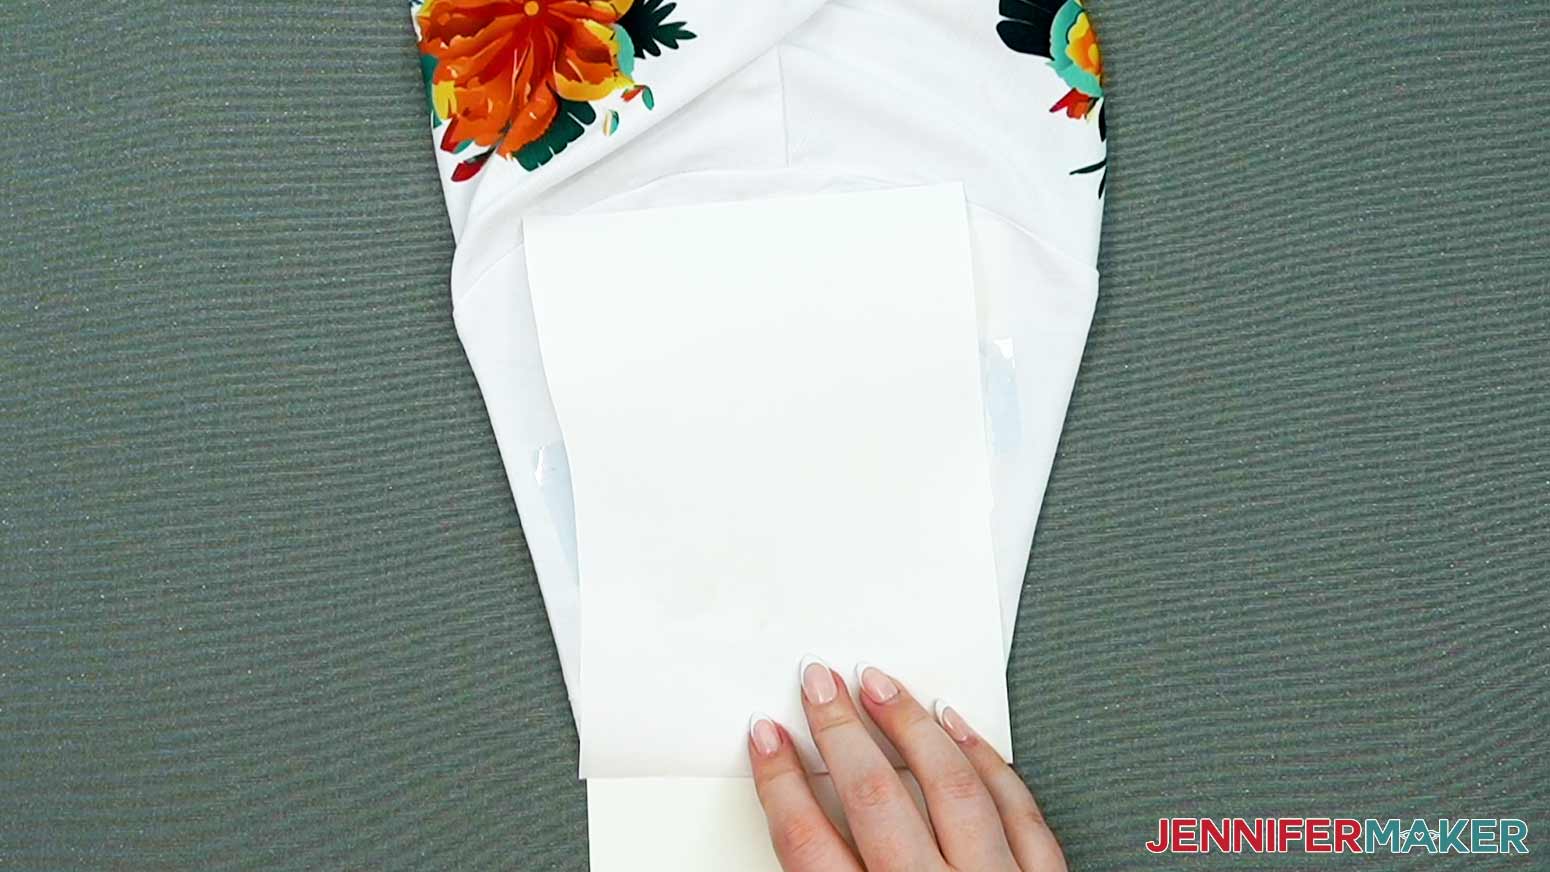 Place a piece of butcher paper on top of the sleeve and taped design.